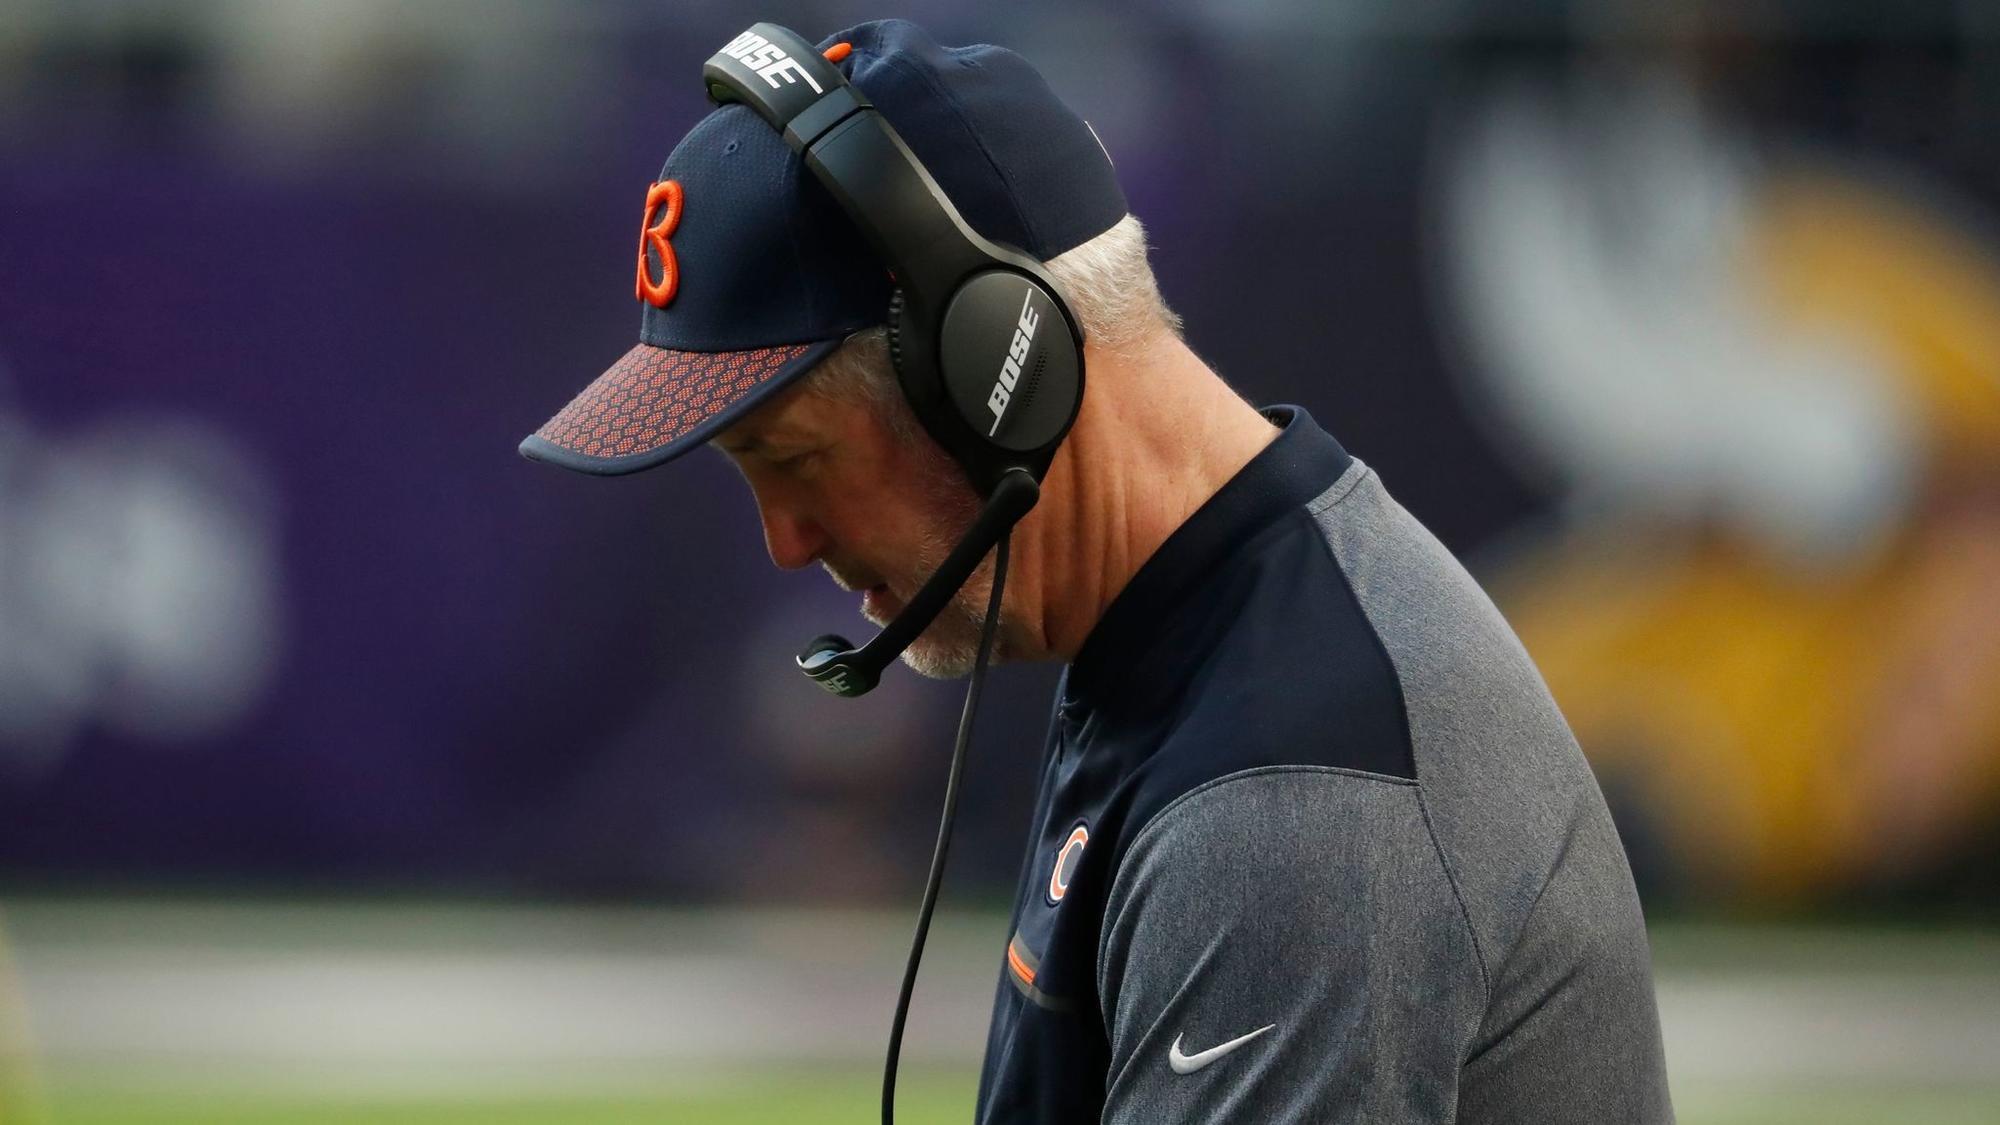 Bears salty after season-ending loss as focus shifts to GM Ryan Pace and the future